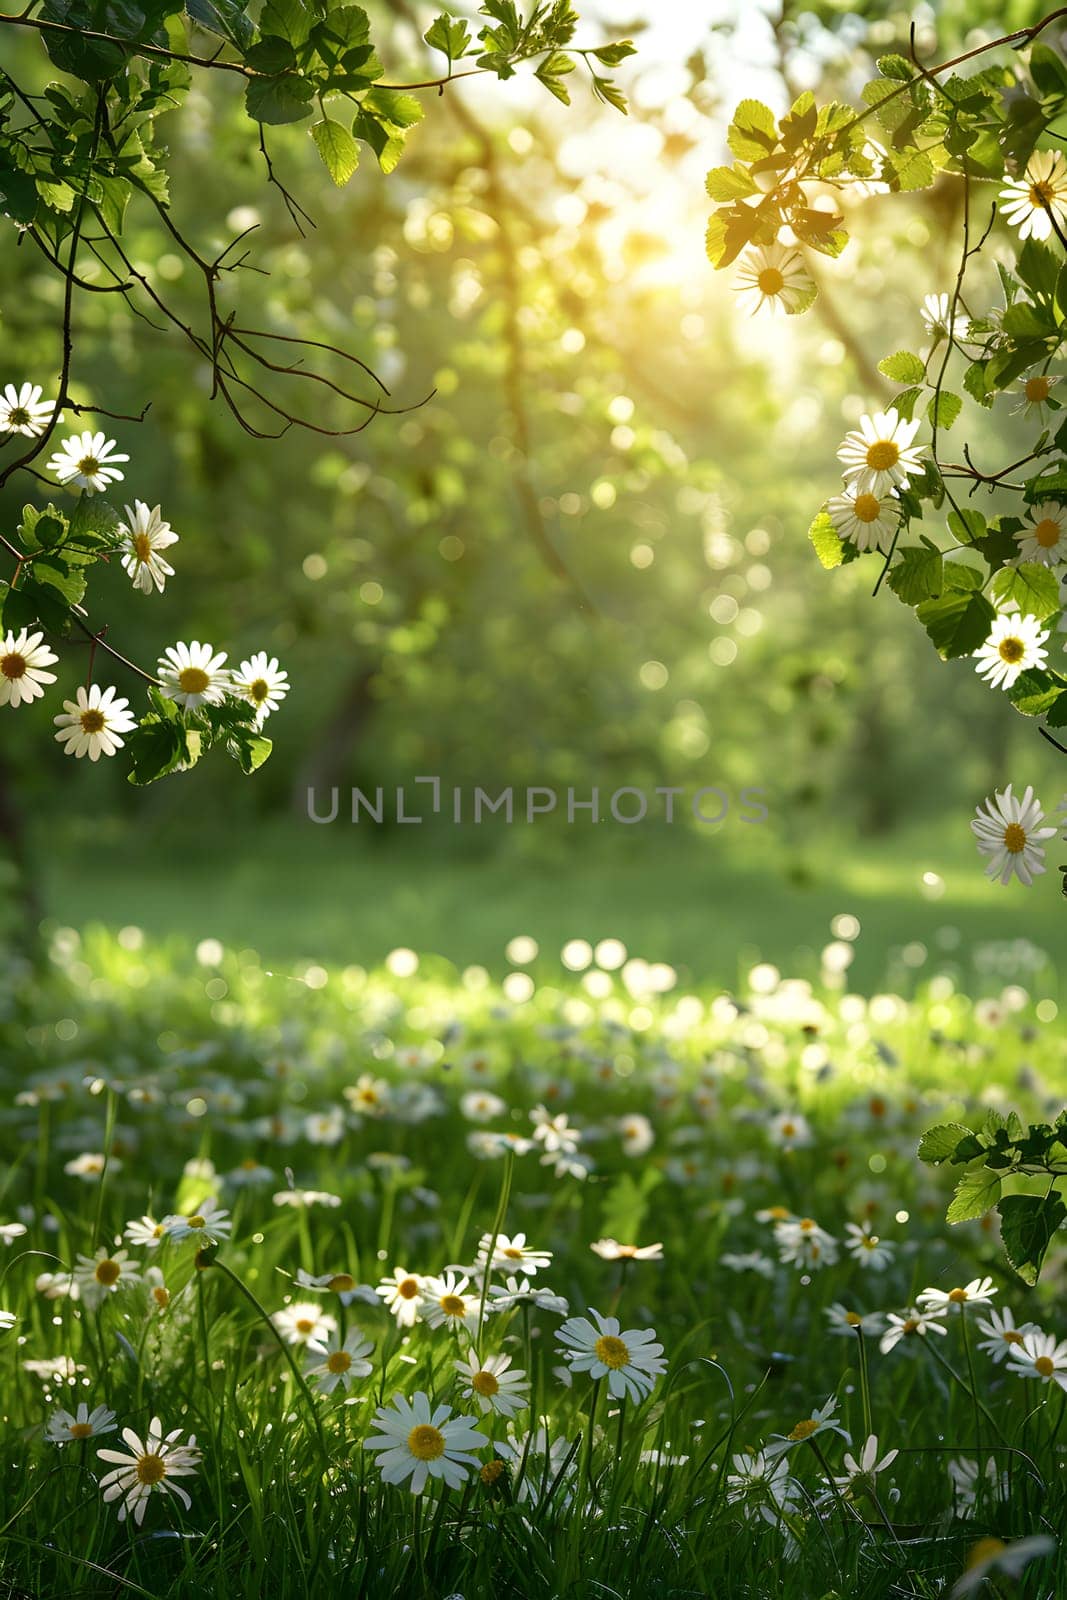 Serene summer landscape of blooming wildflowers, green grass, and sun streaming through leaves with copy space.